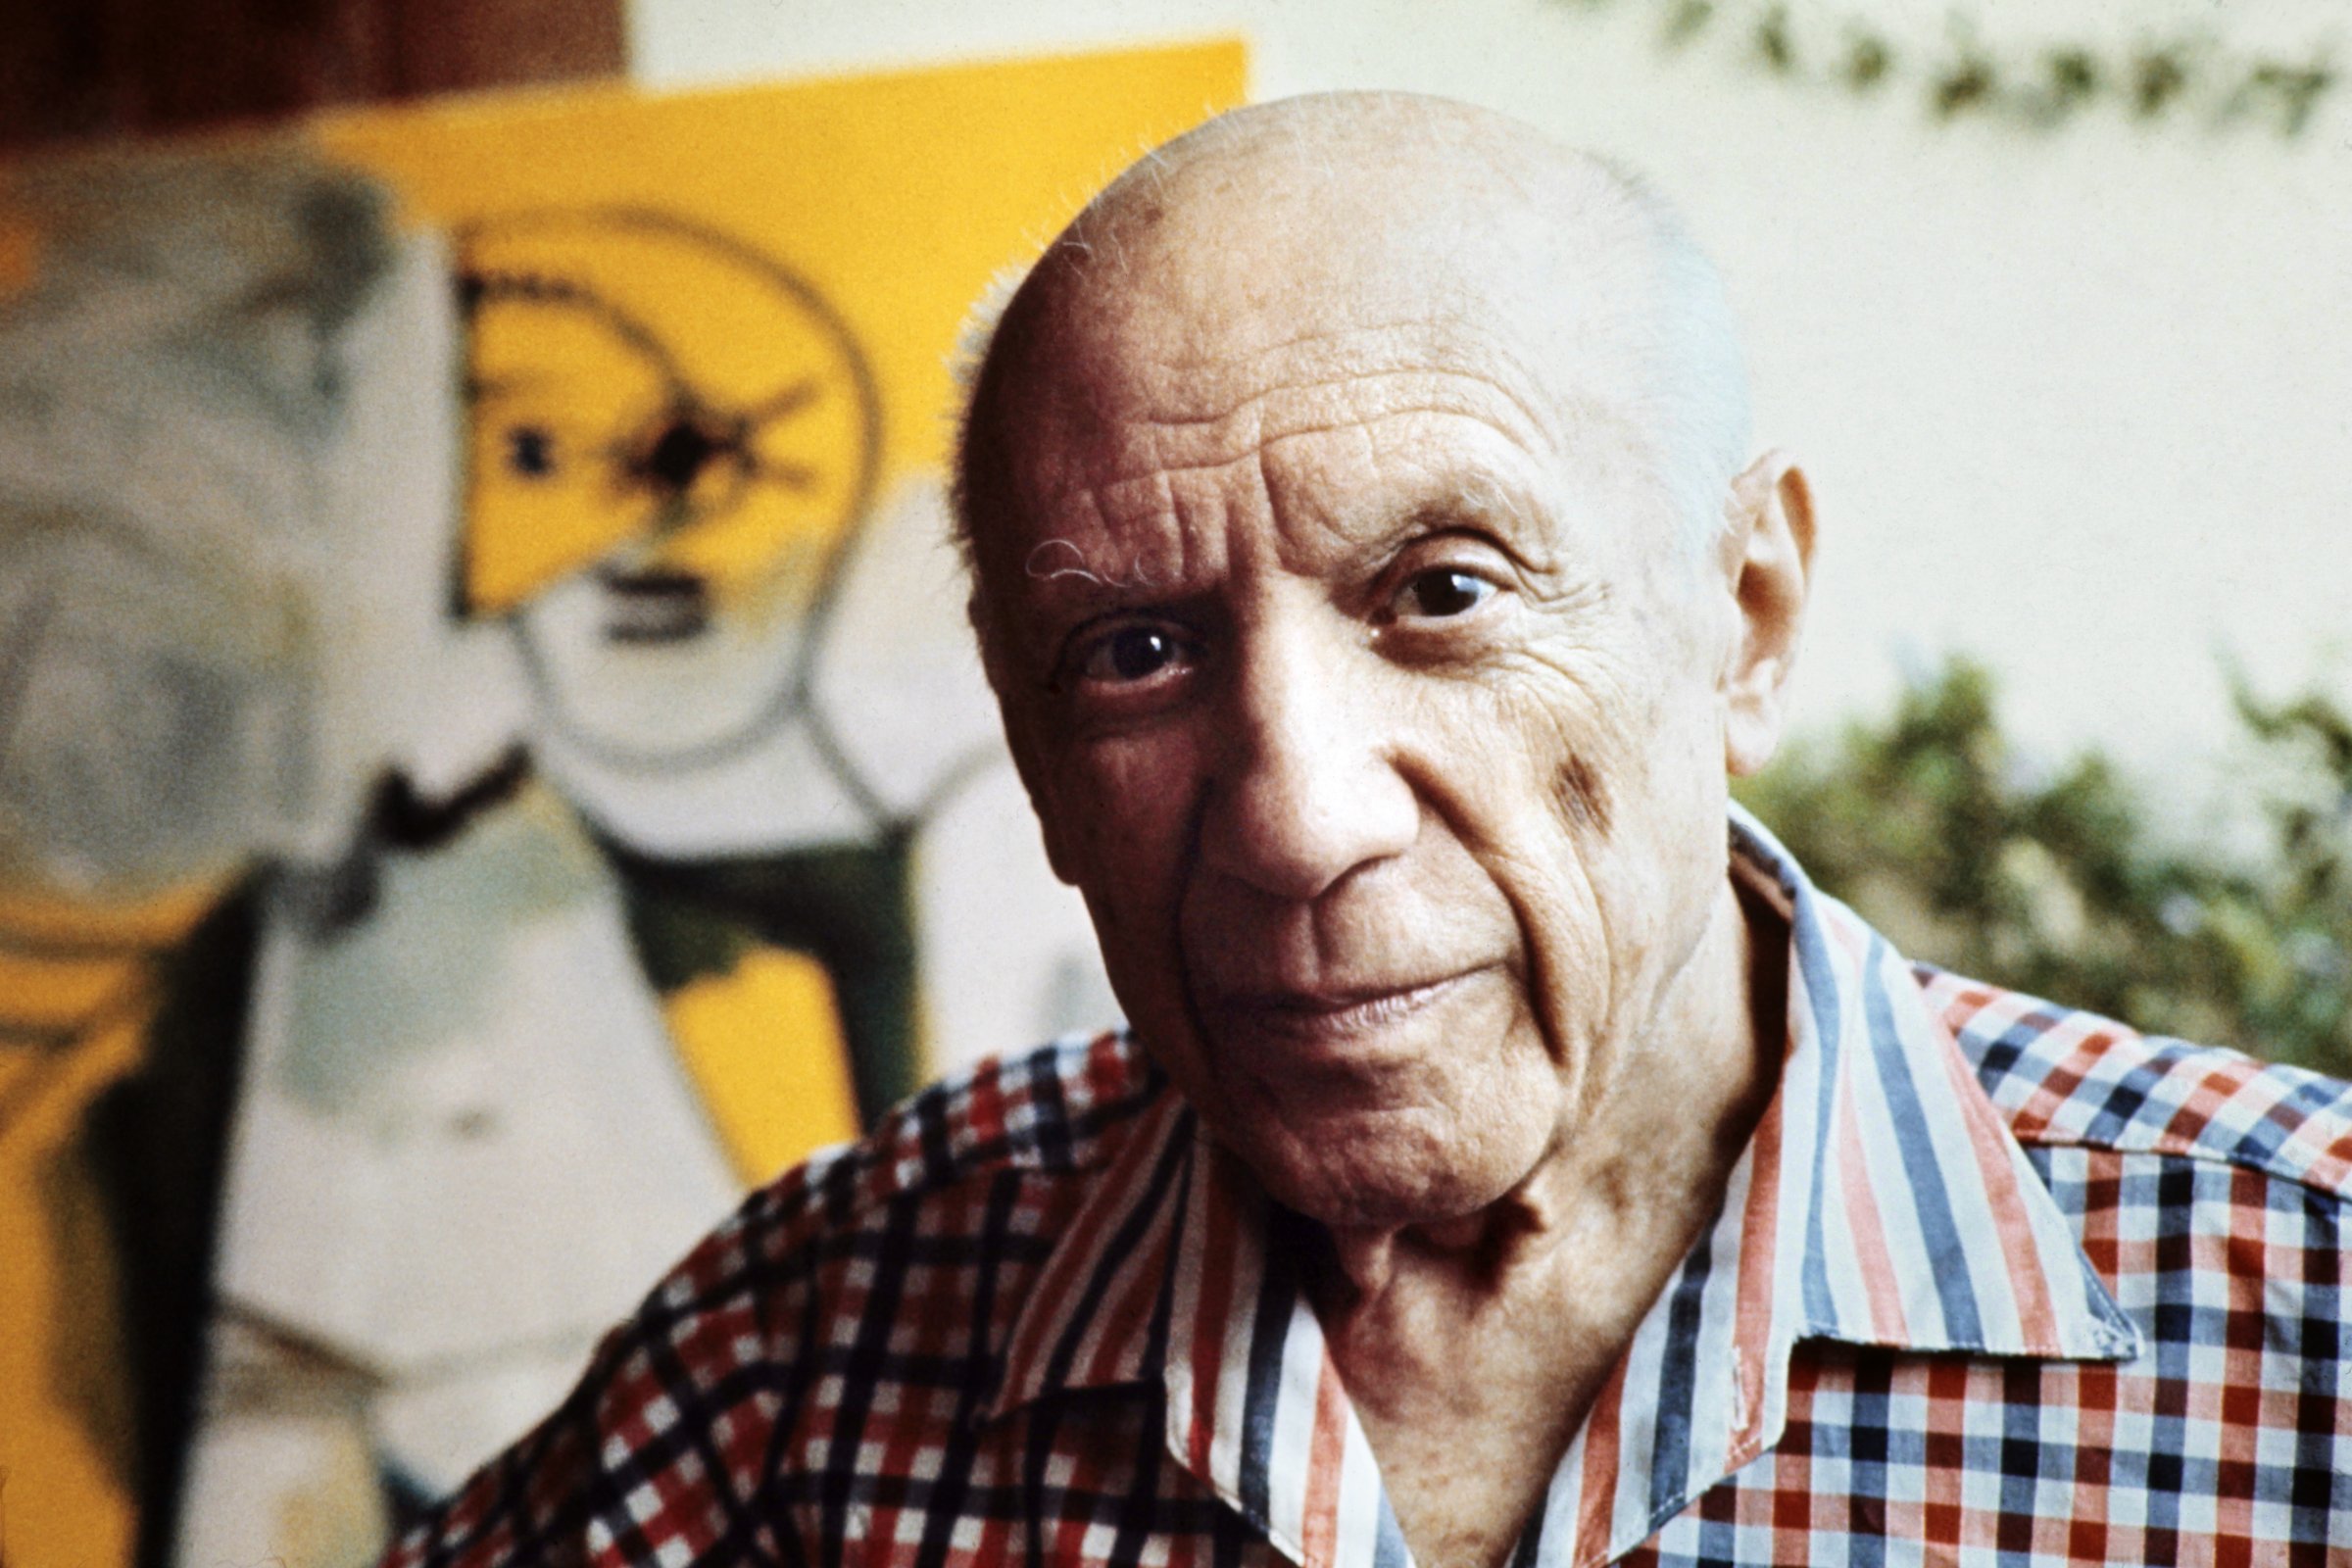 Spanish painter Pablo Picasso in Mougins, France on Oct. 13, 1971.